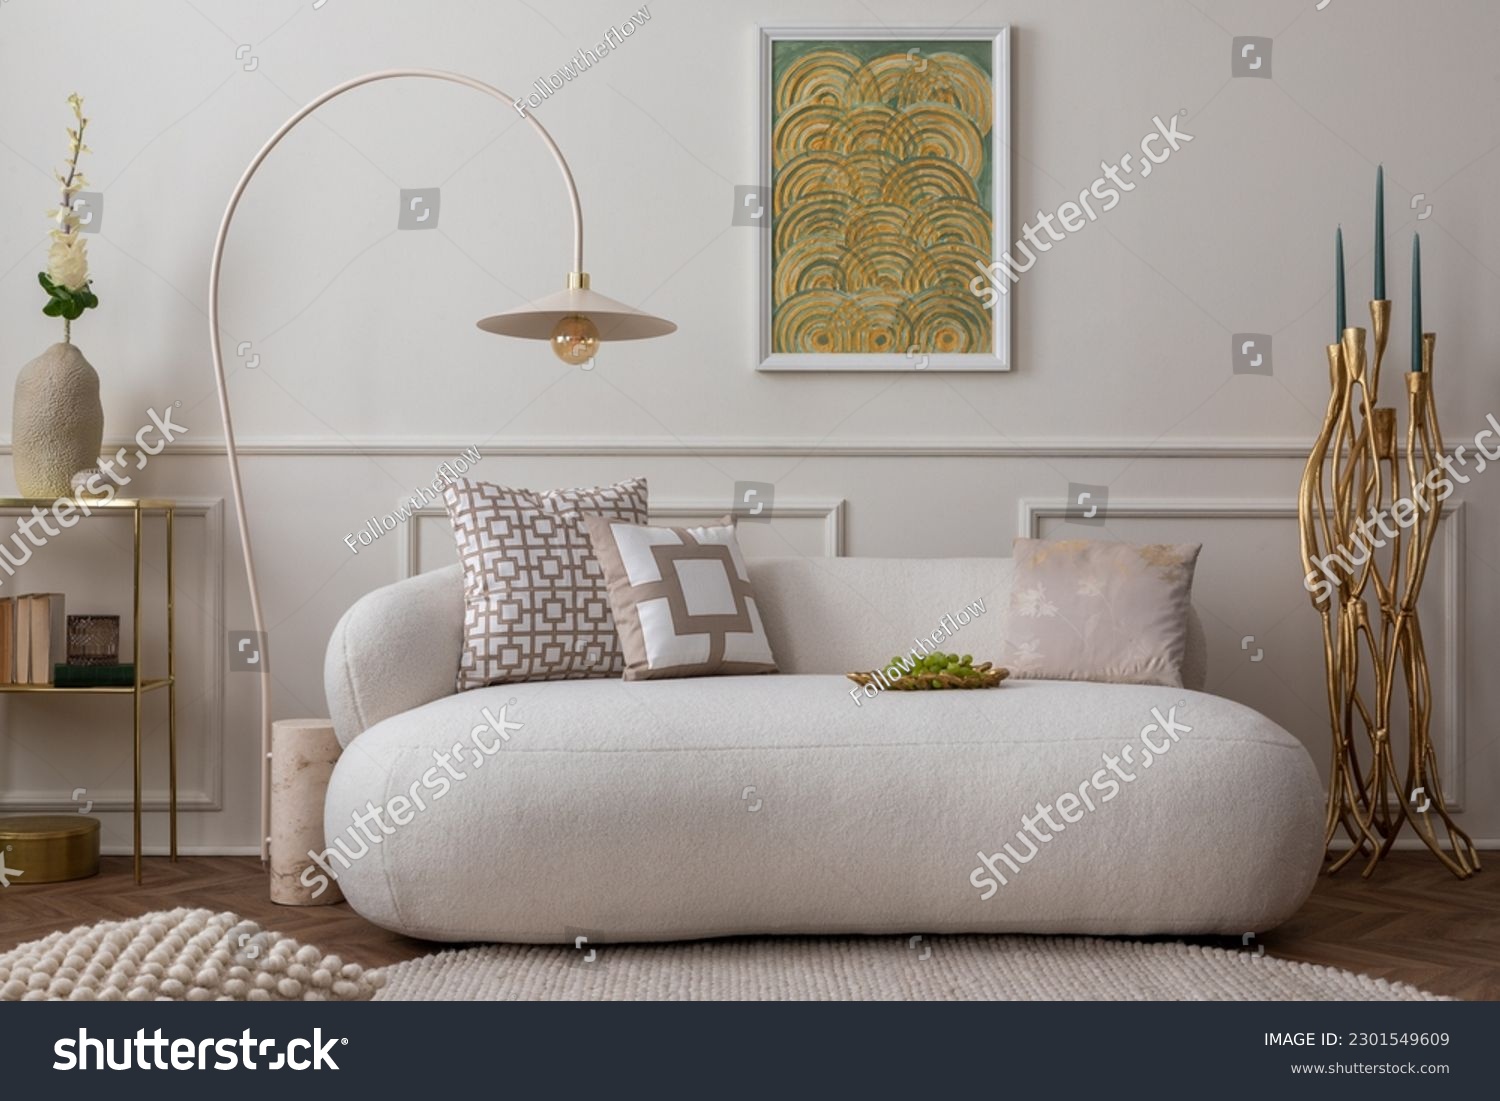 Cozy composition of living room interior with mock up poster frame, white sofa, green pillows, gold trace, plants, beige lamp, wall with stucco and personal accessories. Home decor. Template.  #2301549609